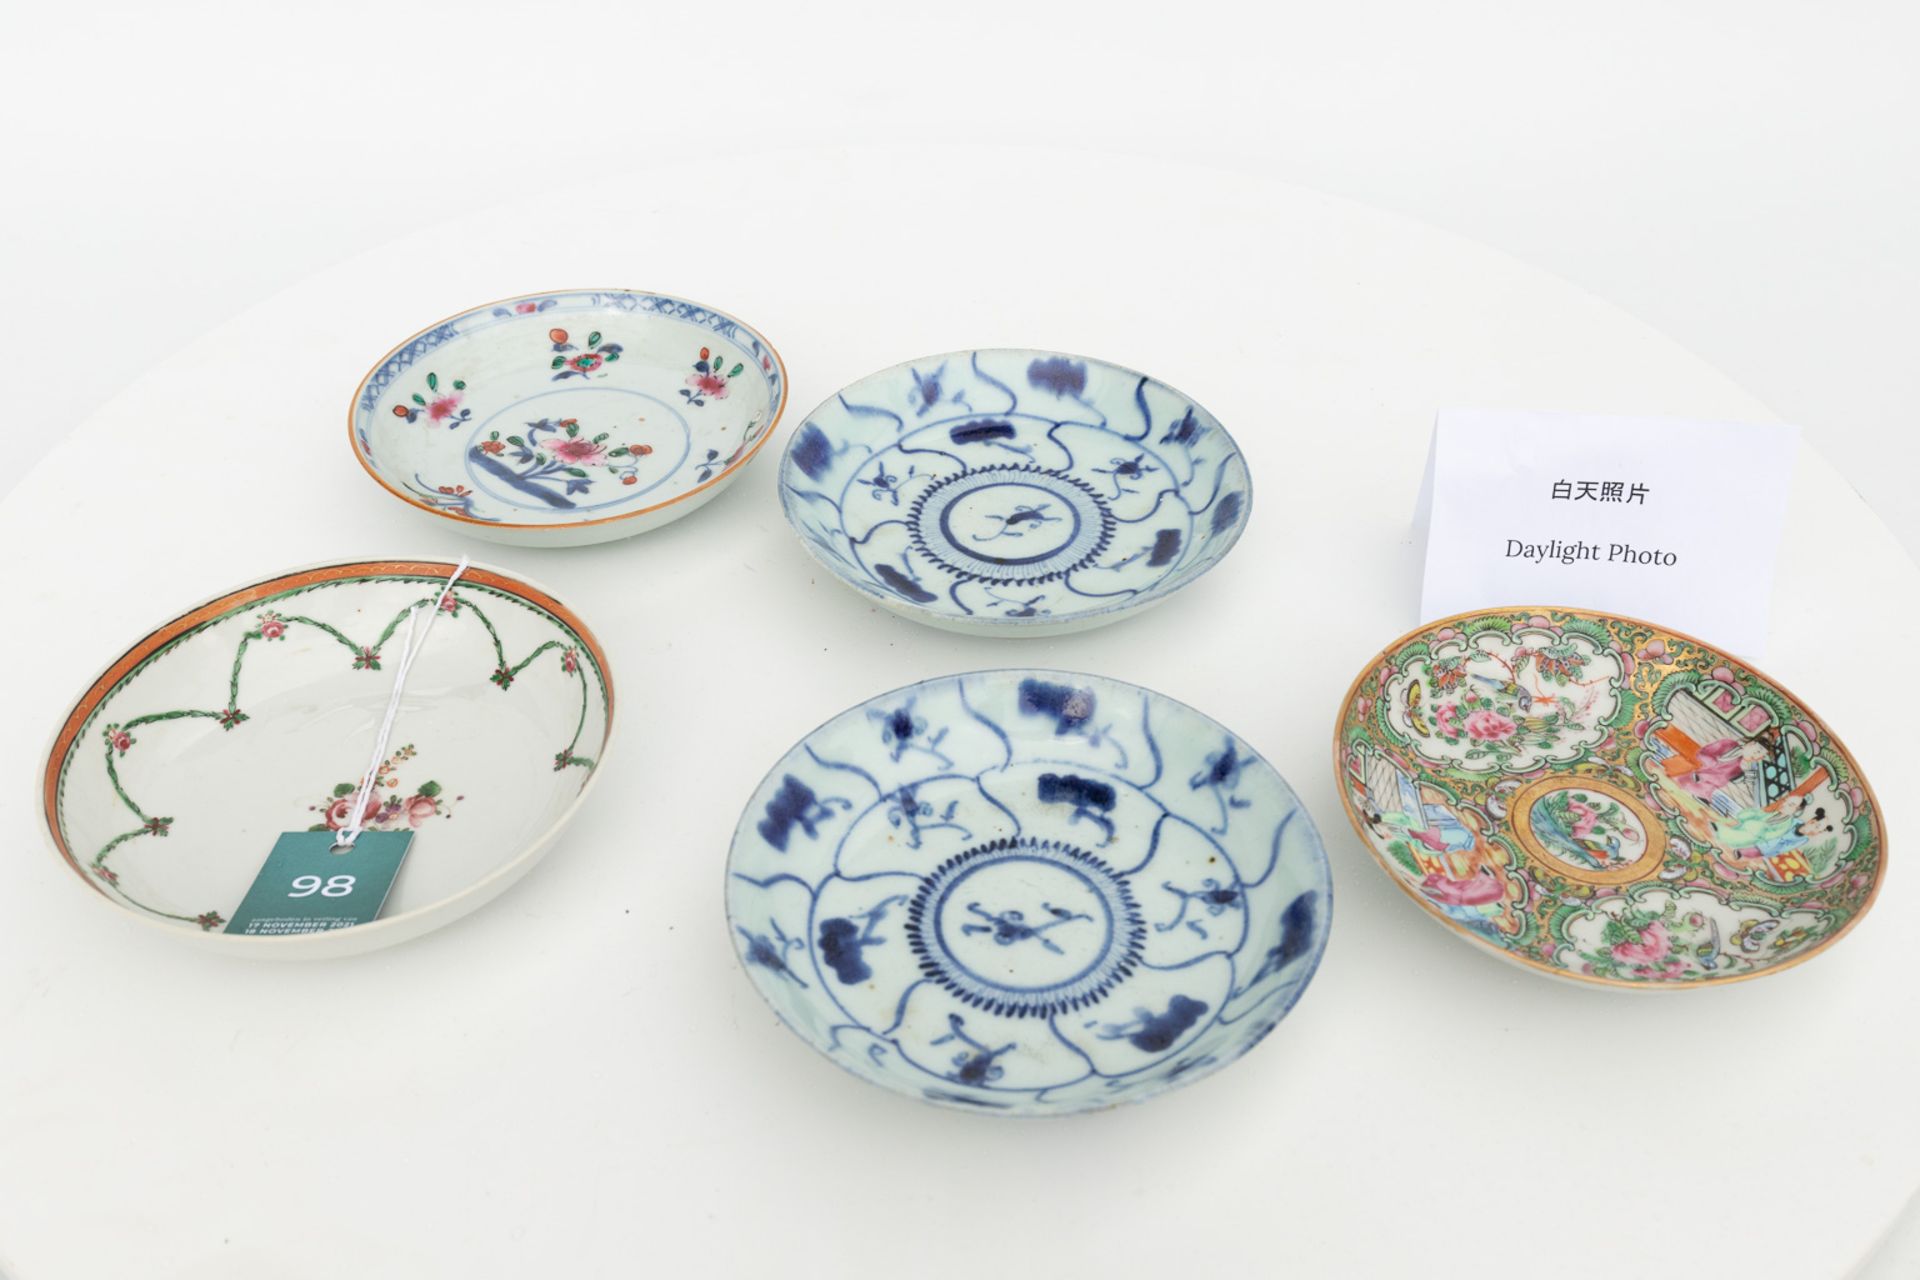 A collection of 5 plates made of Chinese porcelain with different patterns. - Image 15 of 15